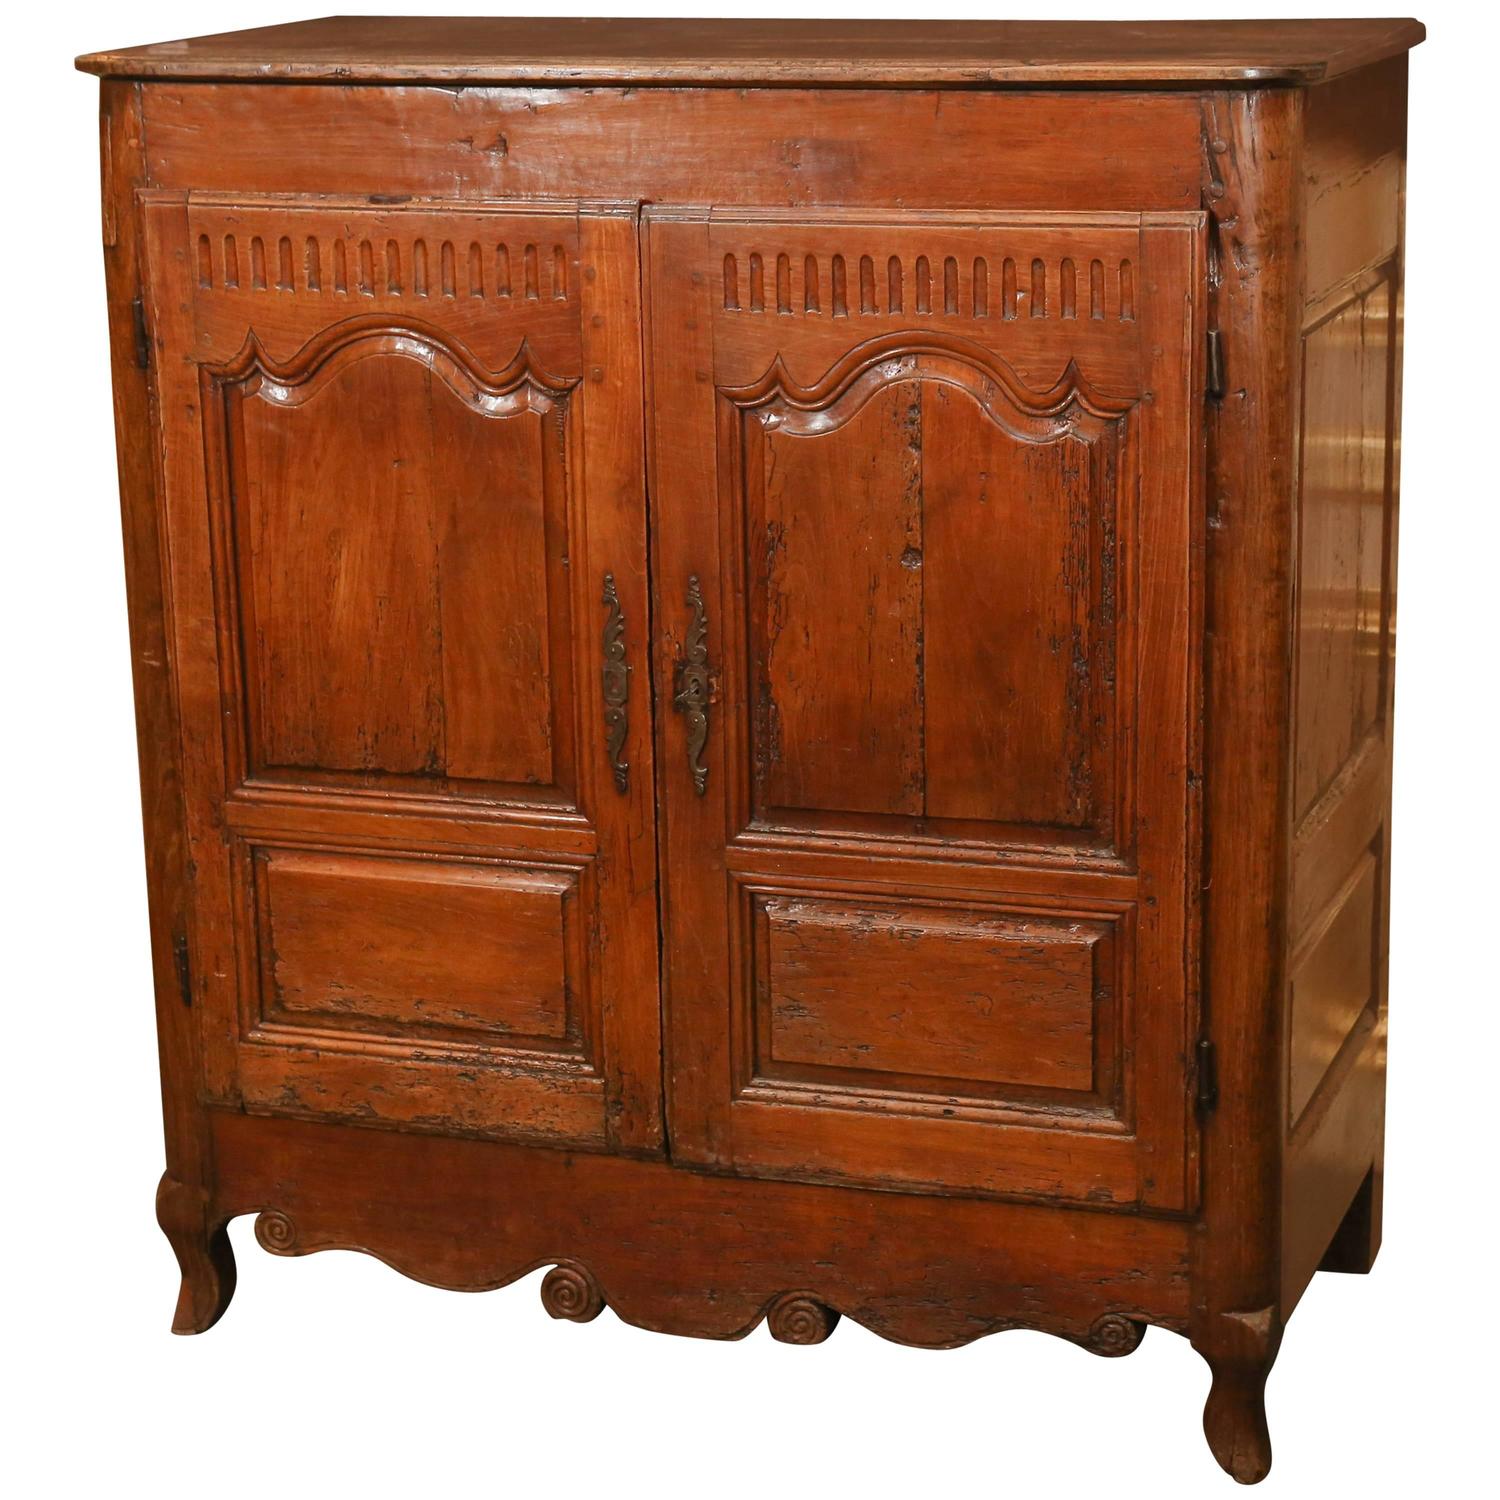 Antique Wormy Chestnut French Cabinet For Sale at 1stdibs